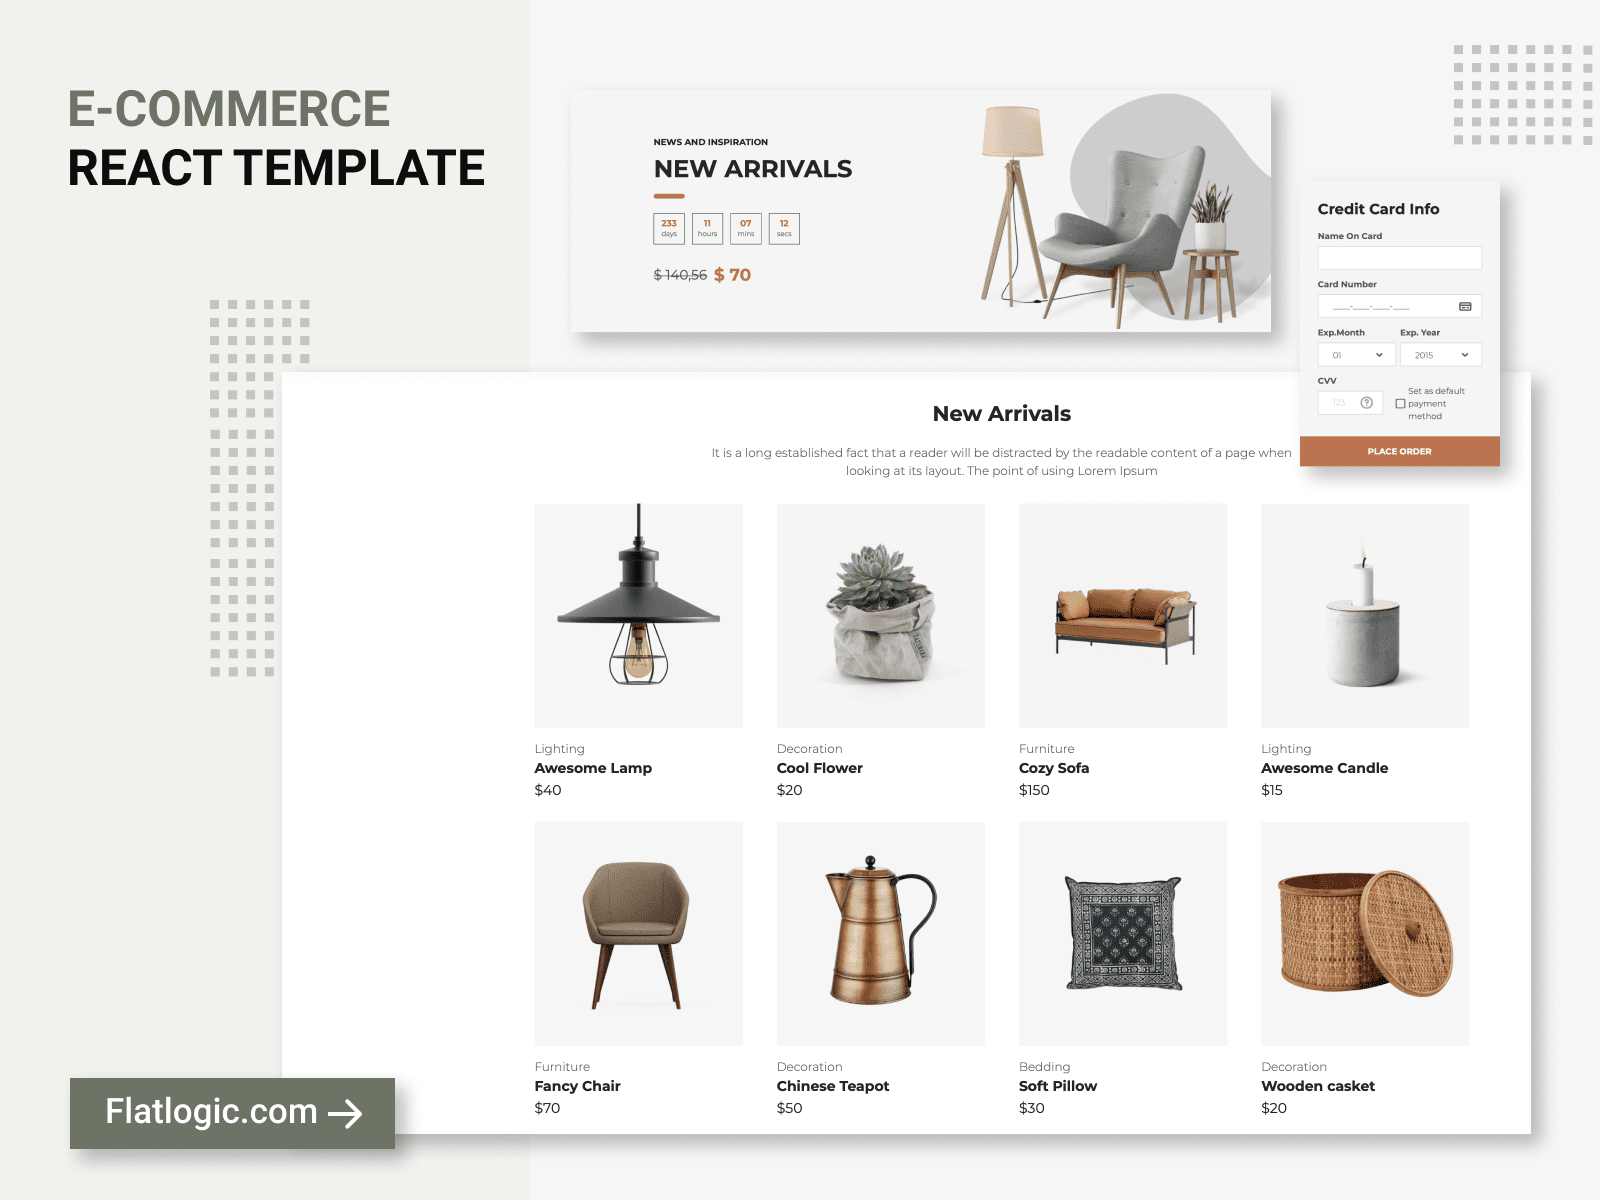 Ready-to-use e-Commerce Template is Released!